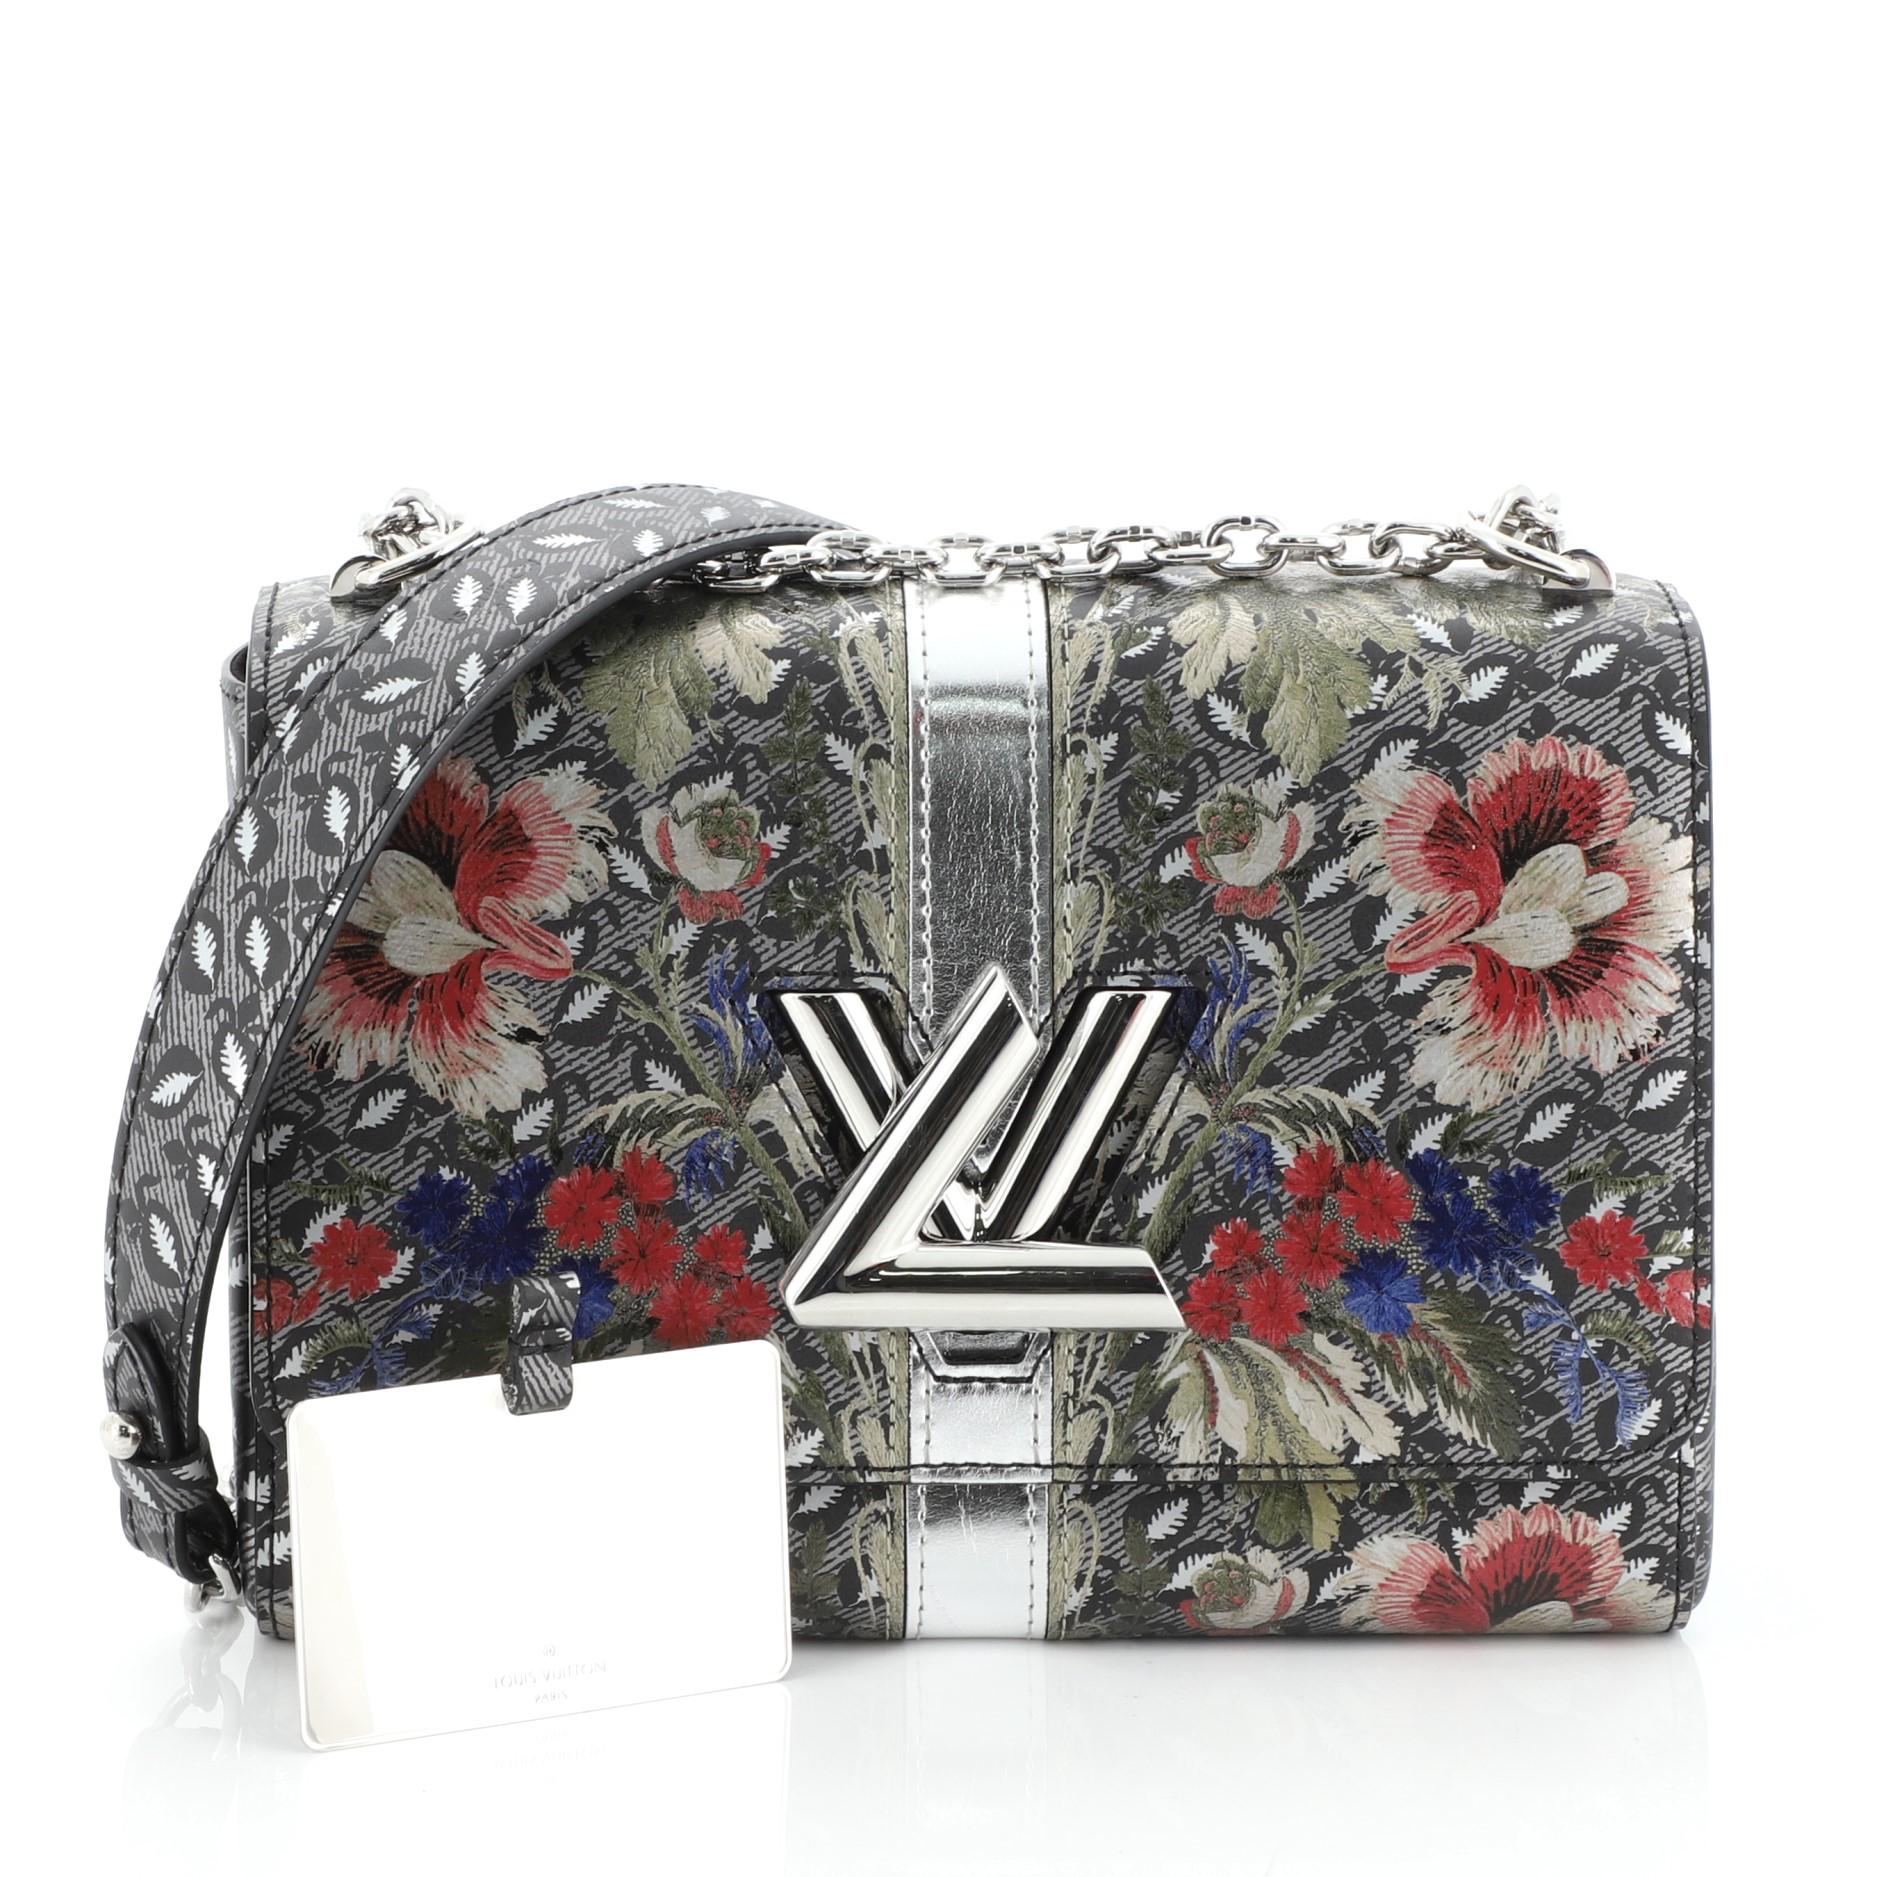 This Louis Vuitton Twist Handbag Limited Edition Floral Print Epi Leather MM, crafted in gray epi leather, features chain-link strap with leather pad, multicolor floral print, and silver-tone hardware. Its LV twist lock closure opens to a black